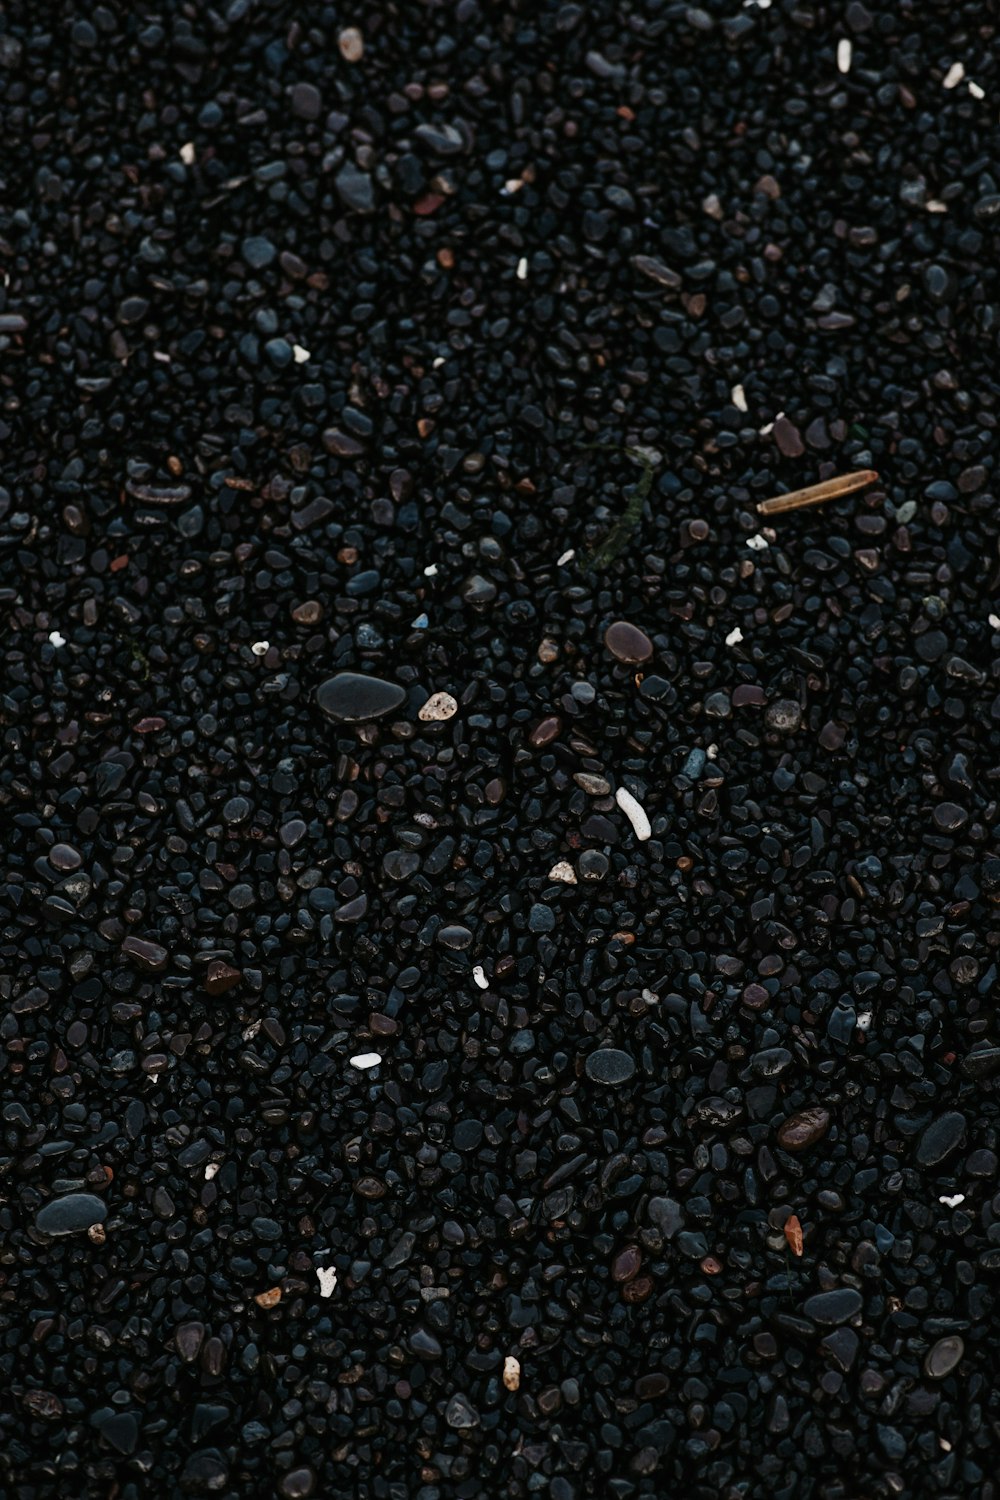 a close up of a cell phone laying on top of a pile of gravel